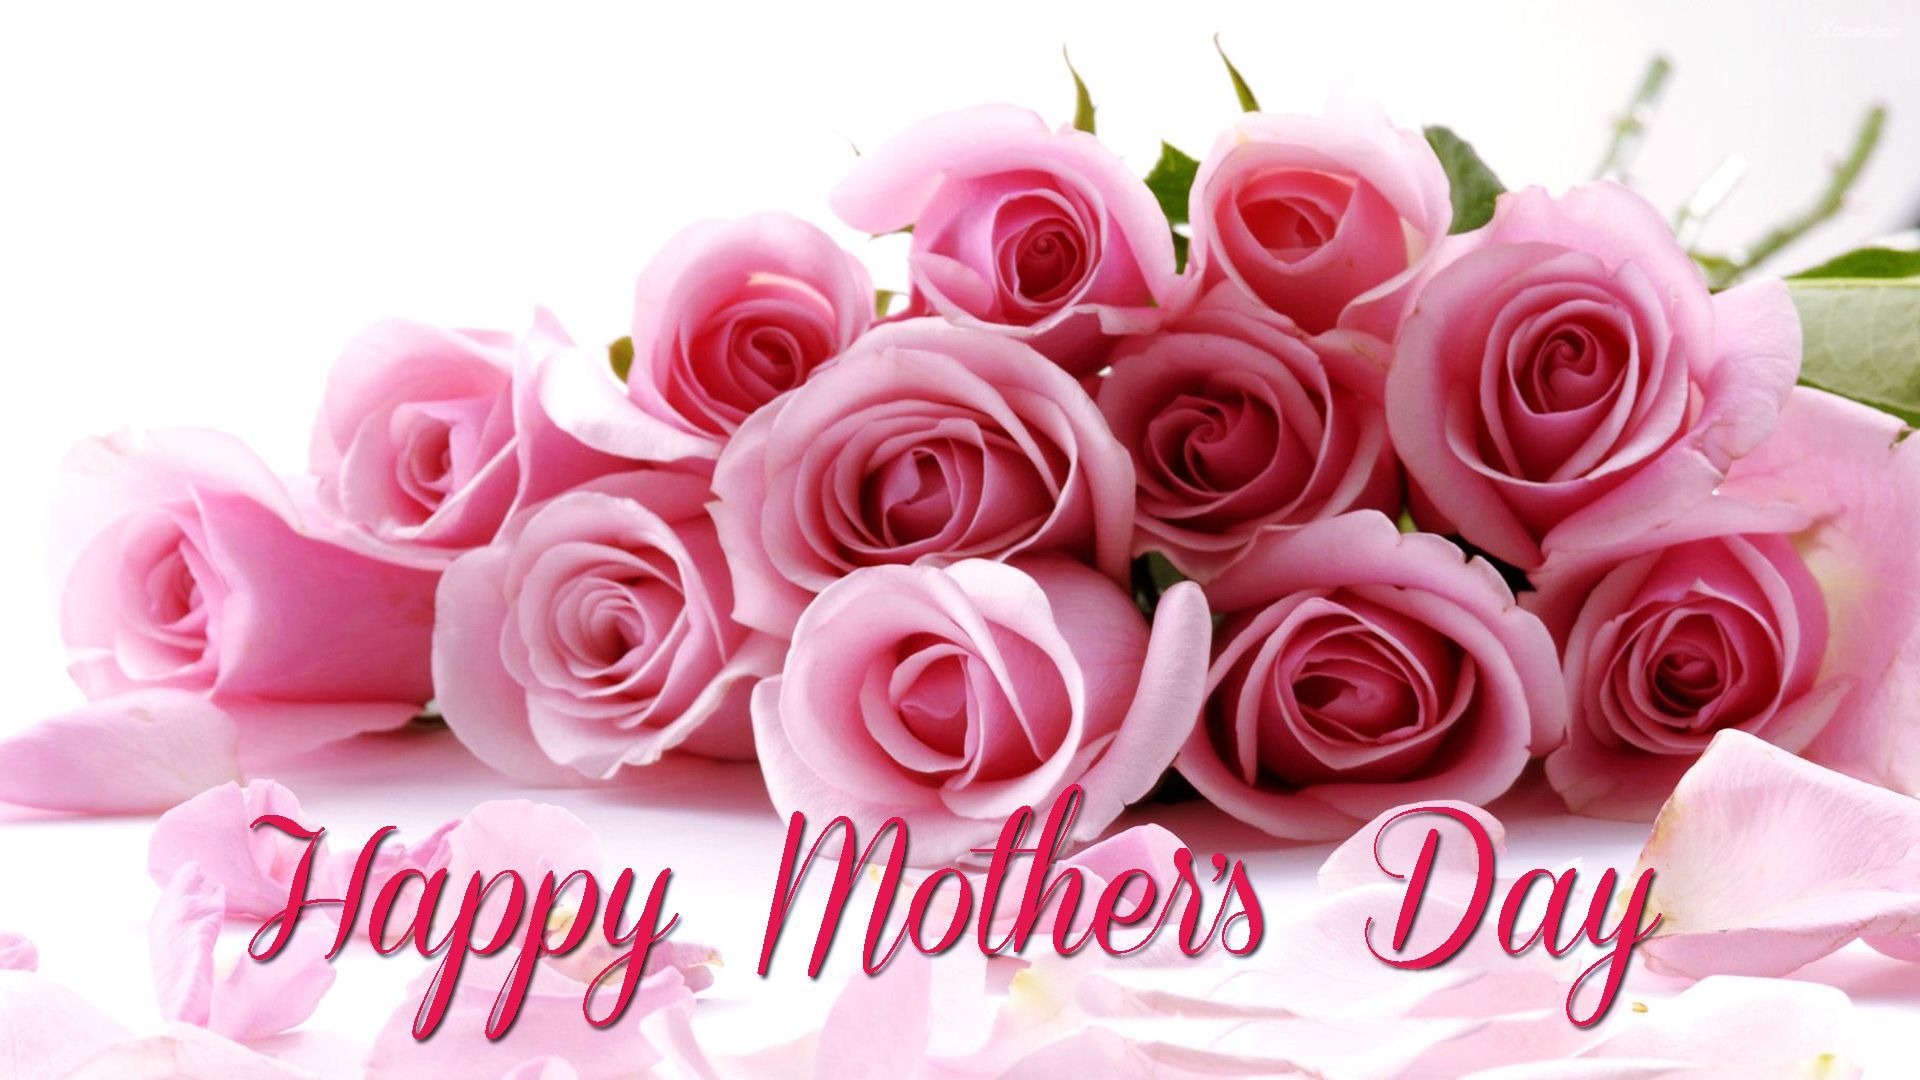 ✅ Happy Mothers Day Image Picture, Photo, HD Wallpaper